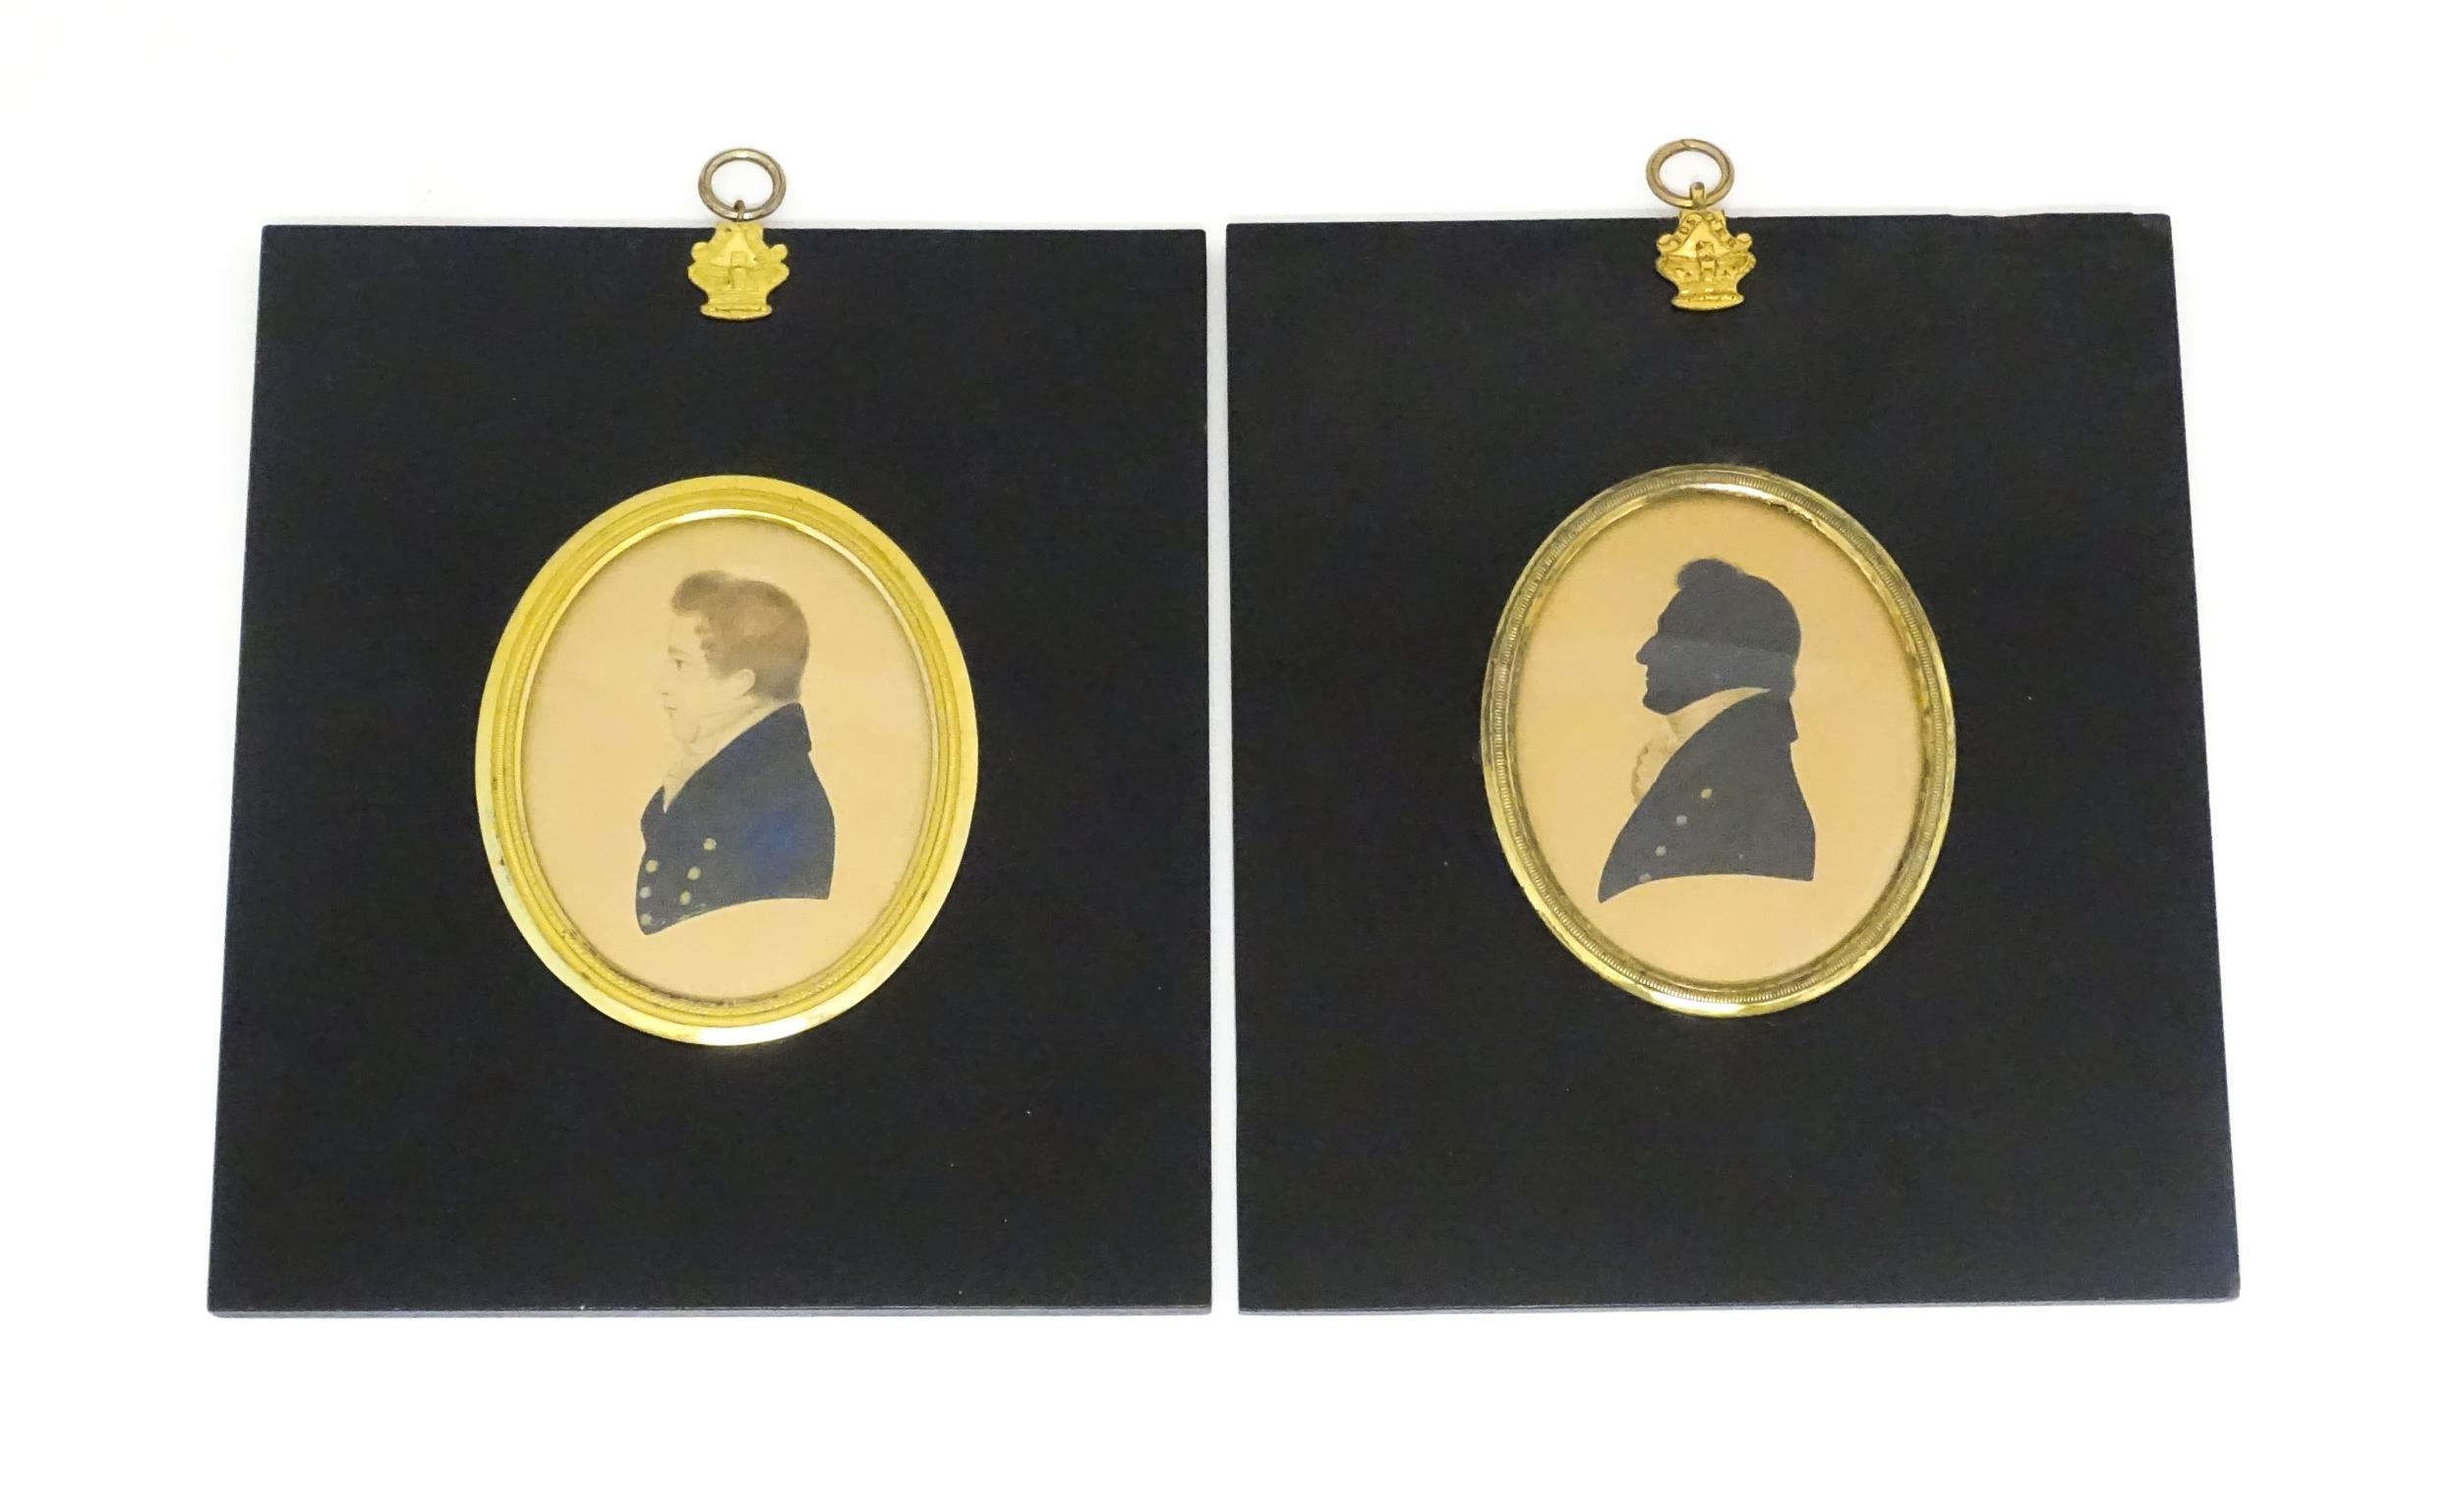 Two 19thC portrait miniature in the manner of Edward Ward Foster, one a silhouette portrait - Image 8 of 8